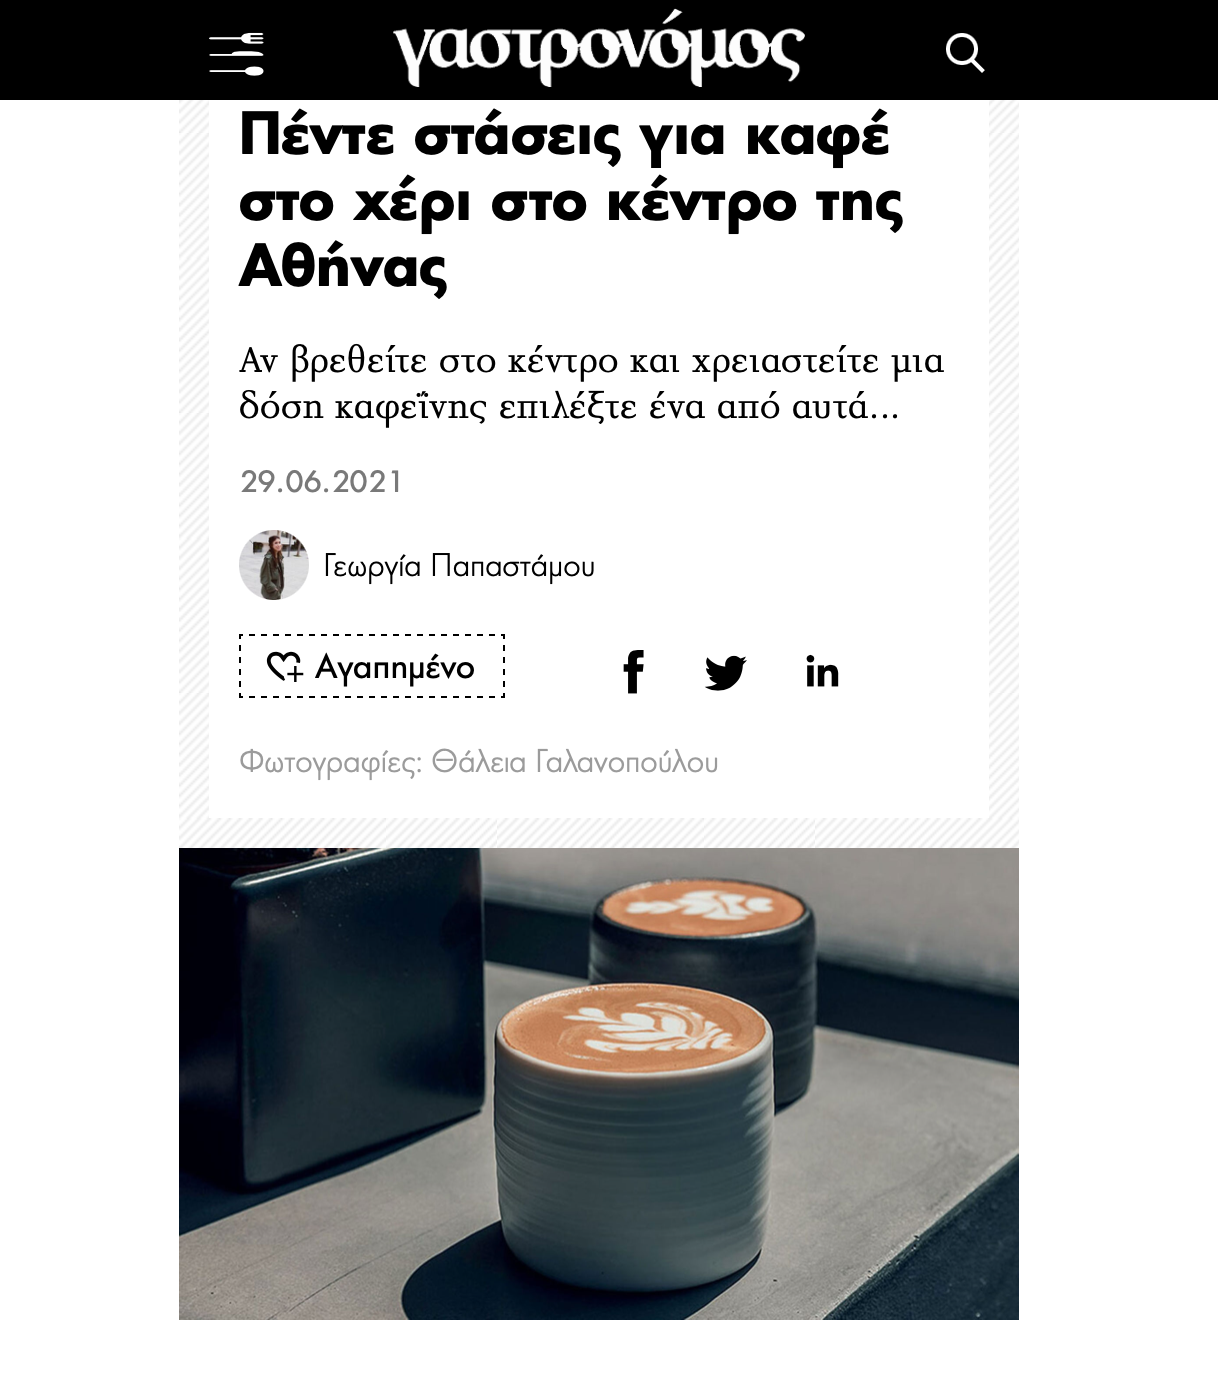 June 2021, Gastronomos, 5 trends for takeaway coffee in Athens